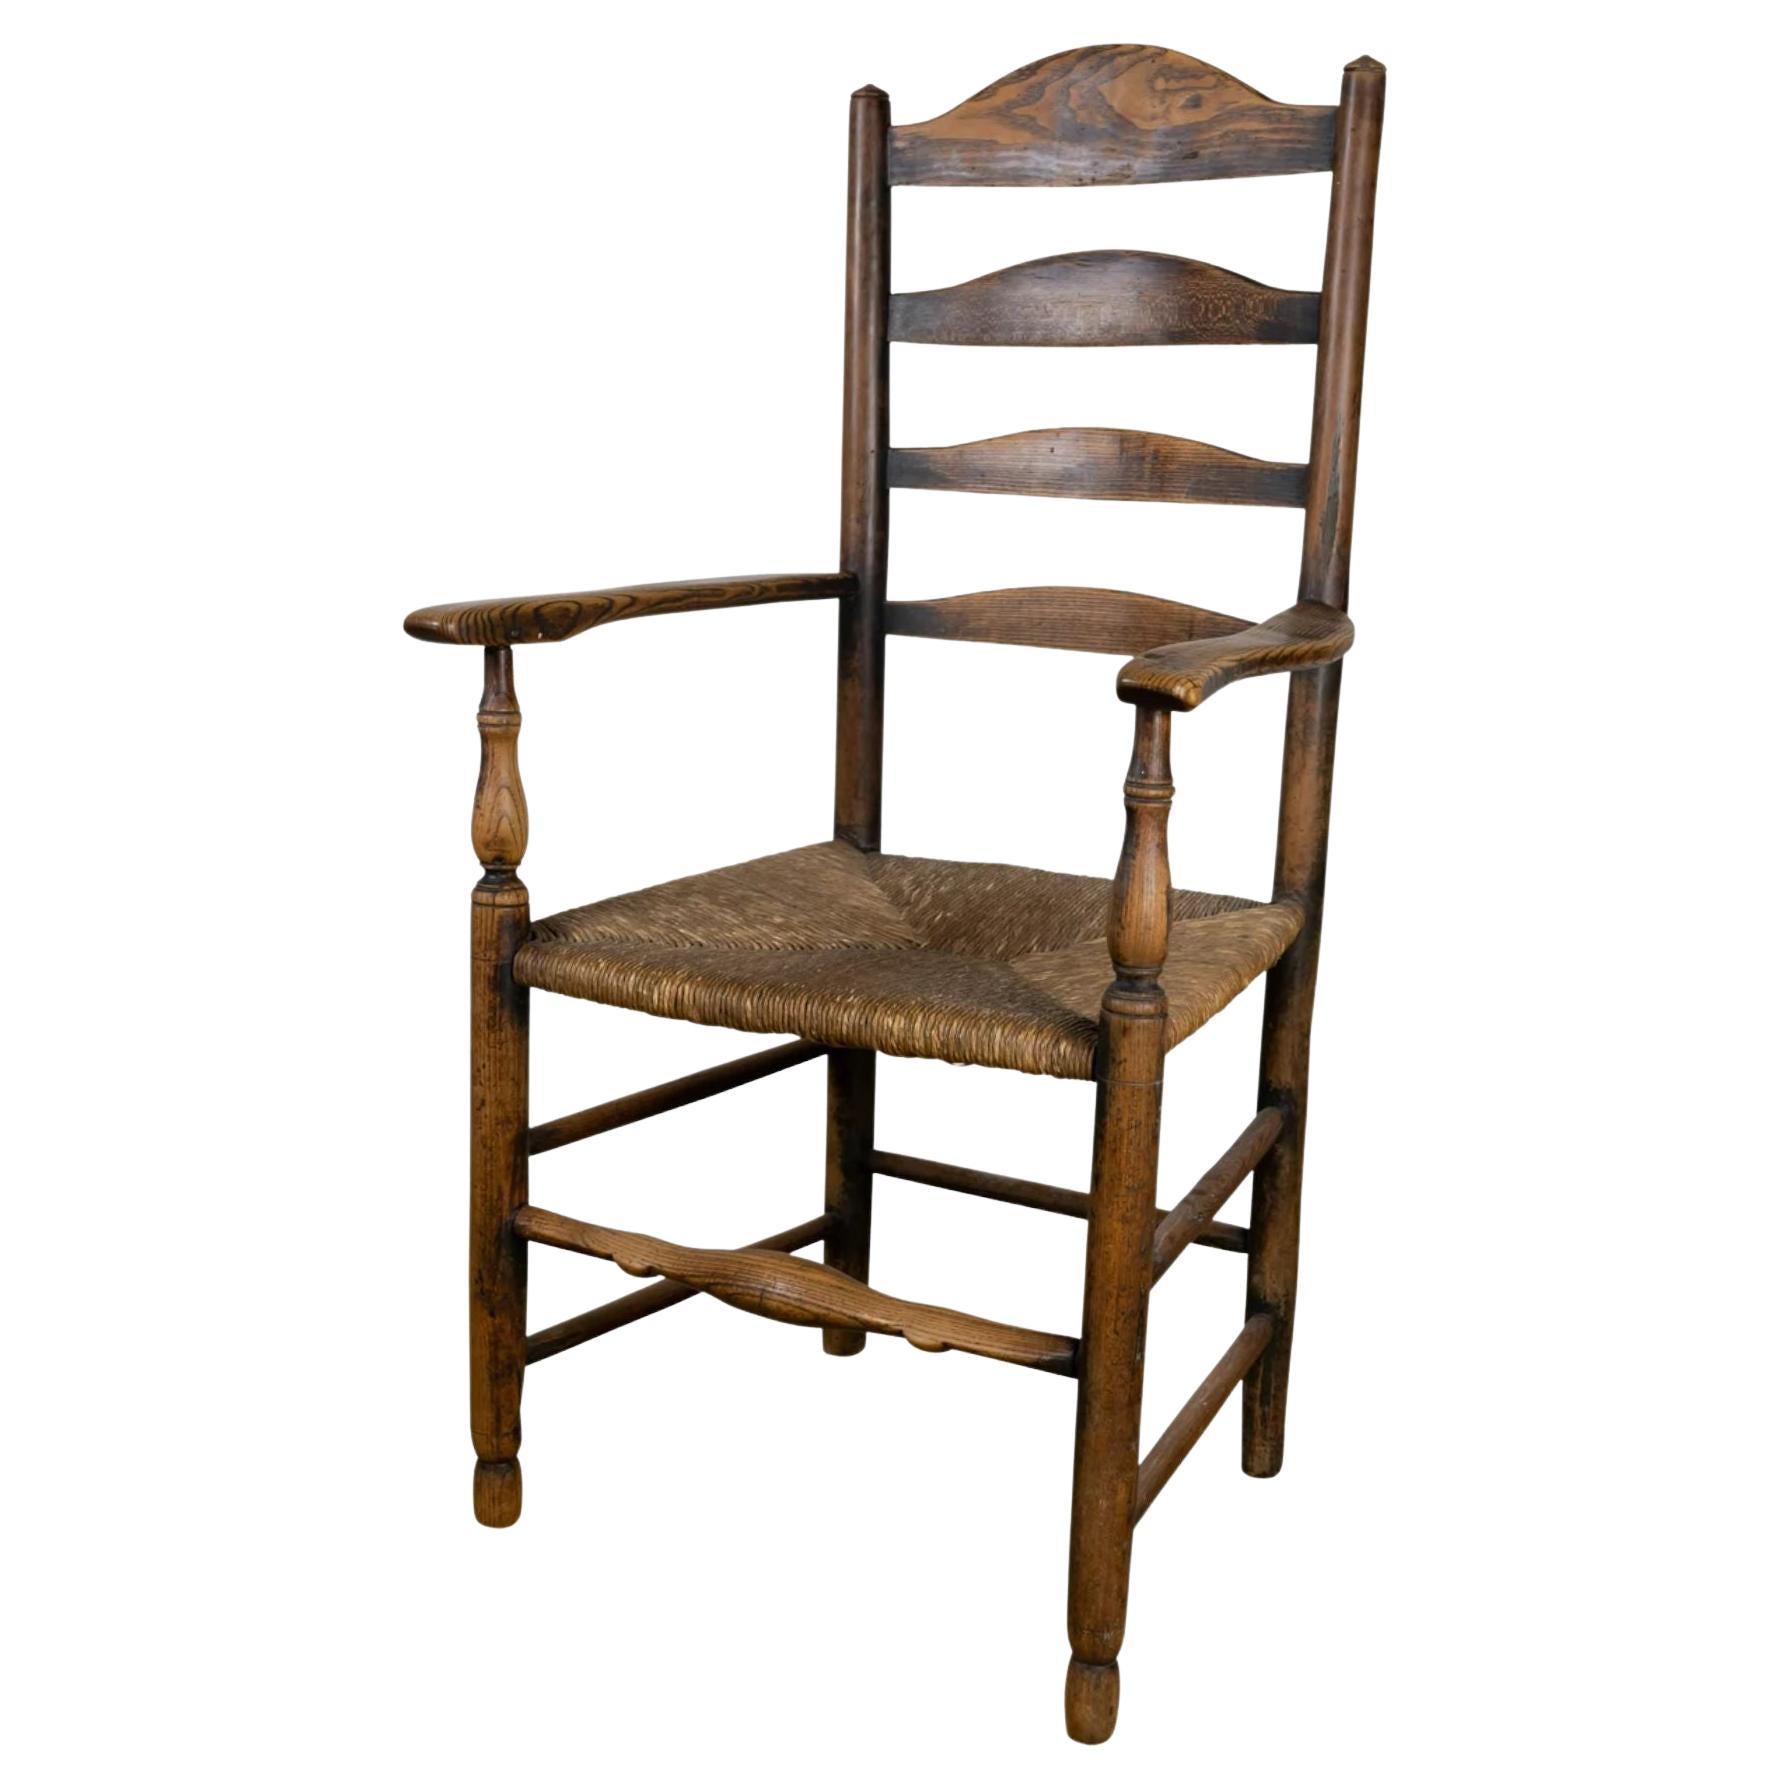 English Ladder Back Armchair, Early 19th Century